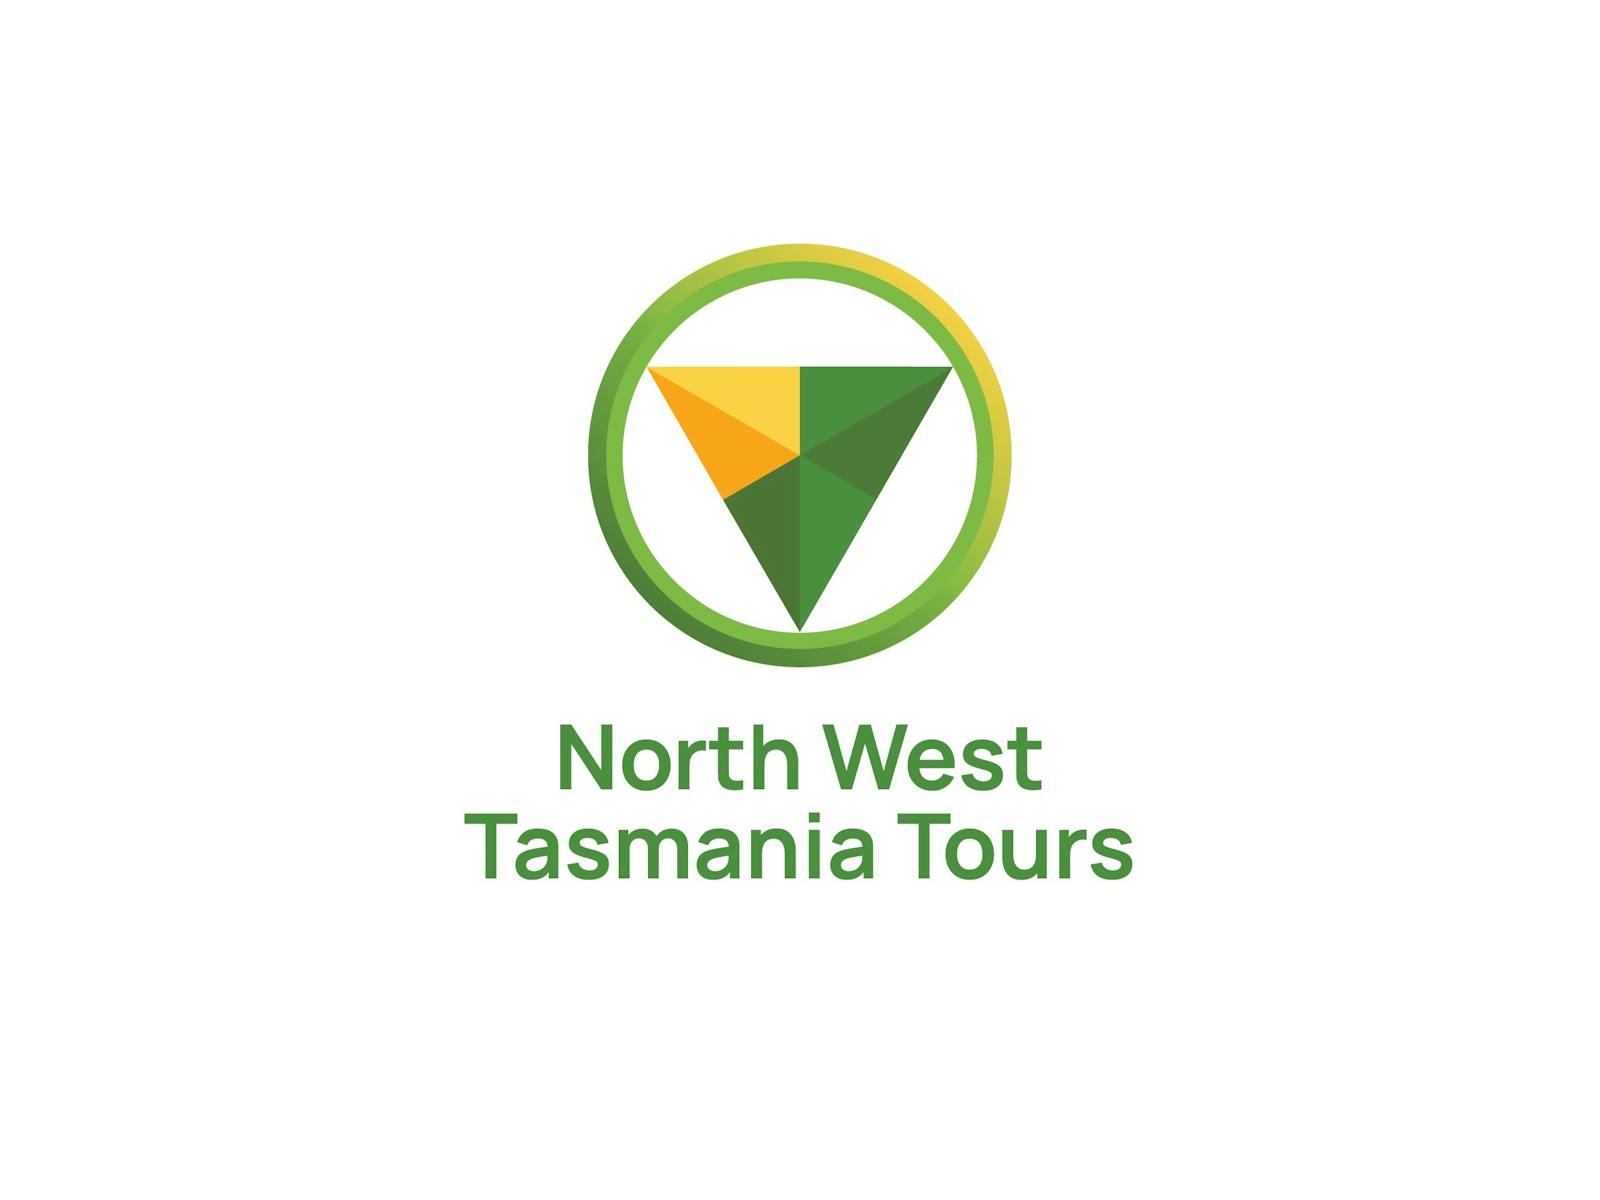 North West Tasmania Tours, Email: info@northwesttasmaniatours.com W: www.northwesttasmaniatours.com